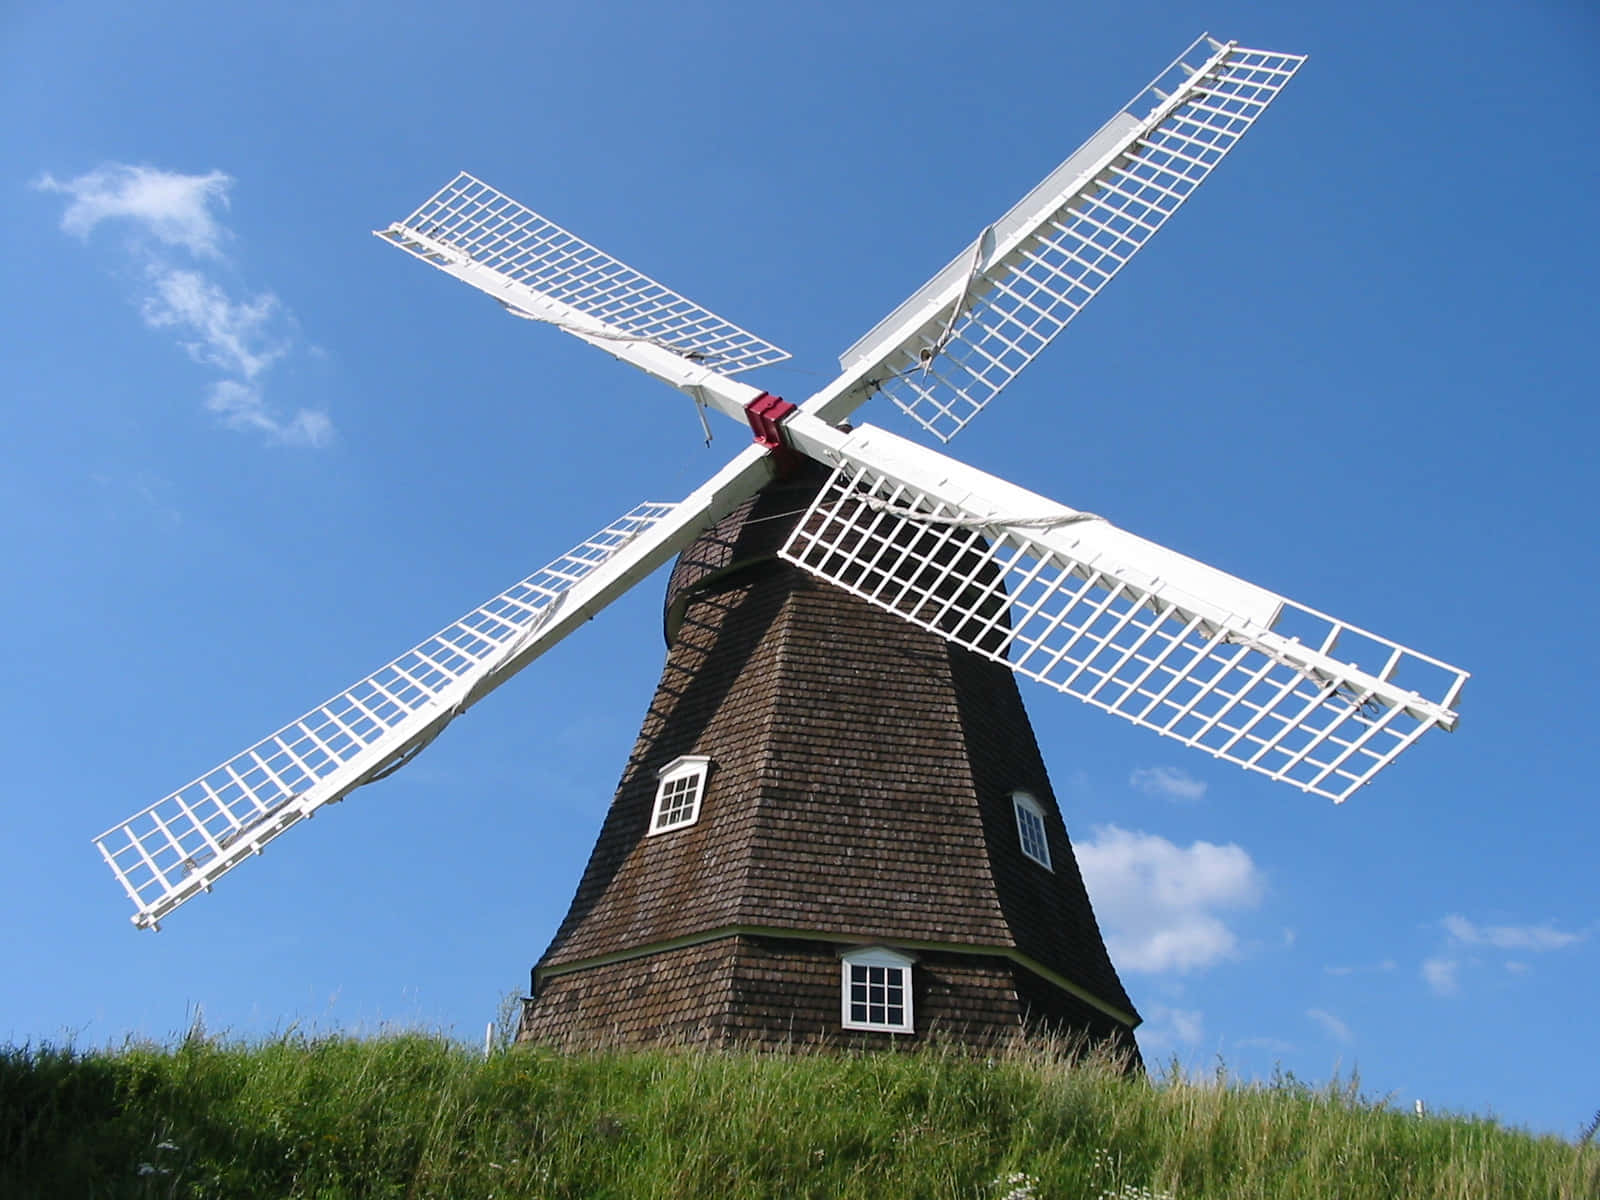 An old, rustic windmill in a peaceful country landscape.